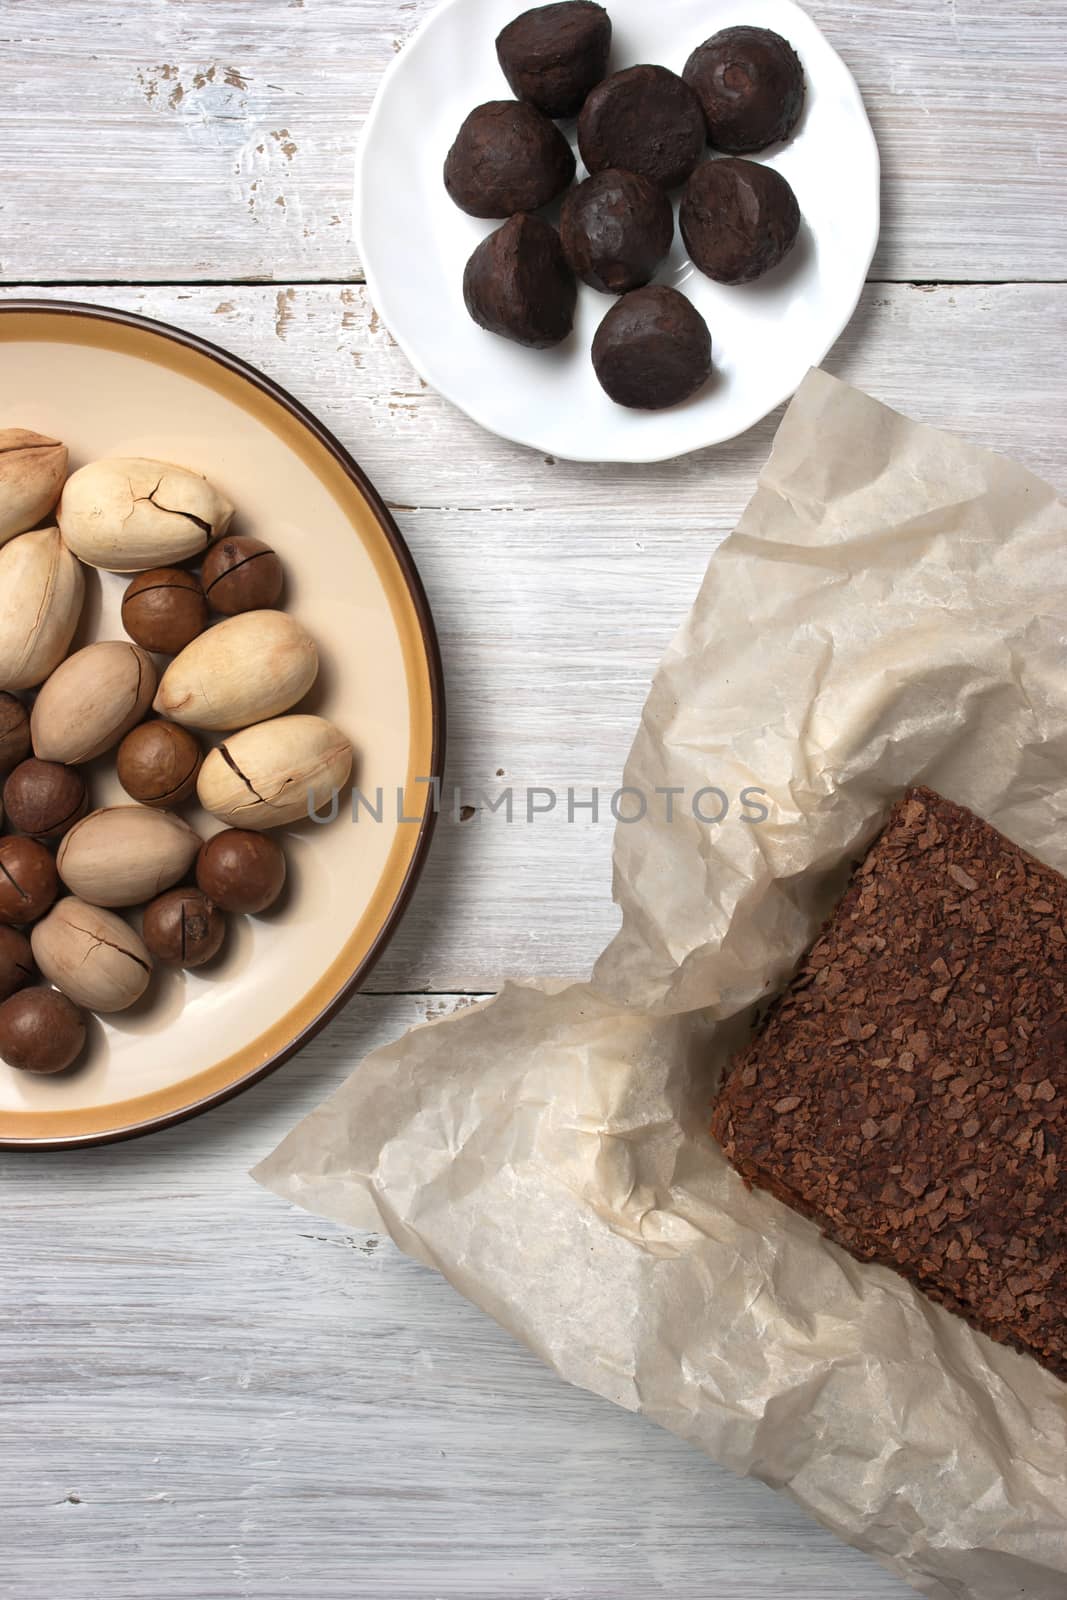 Nuts, truffle candy and chocolate cake on the white background by Deniskarpenkov